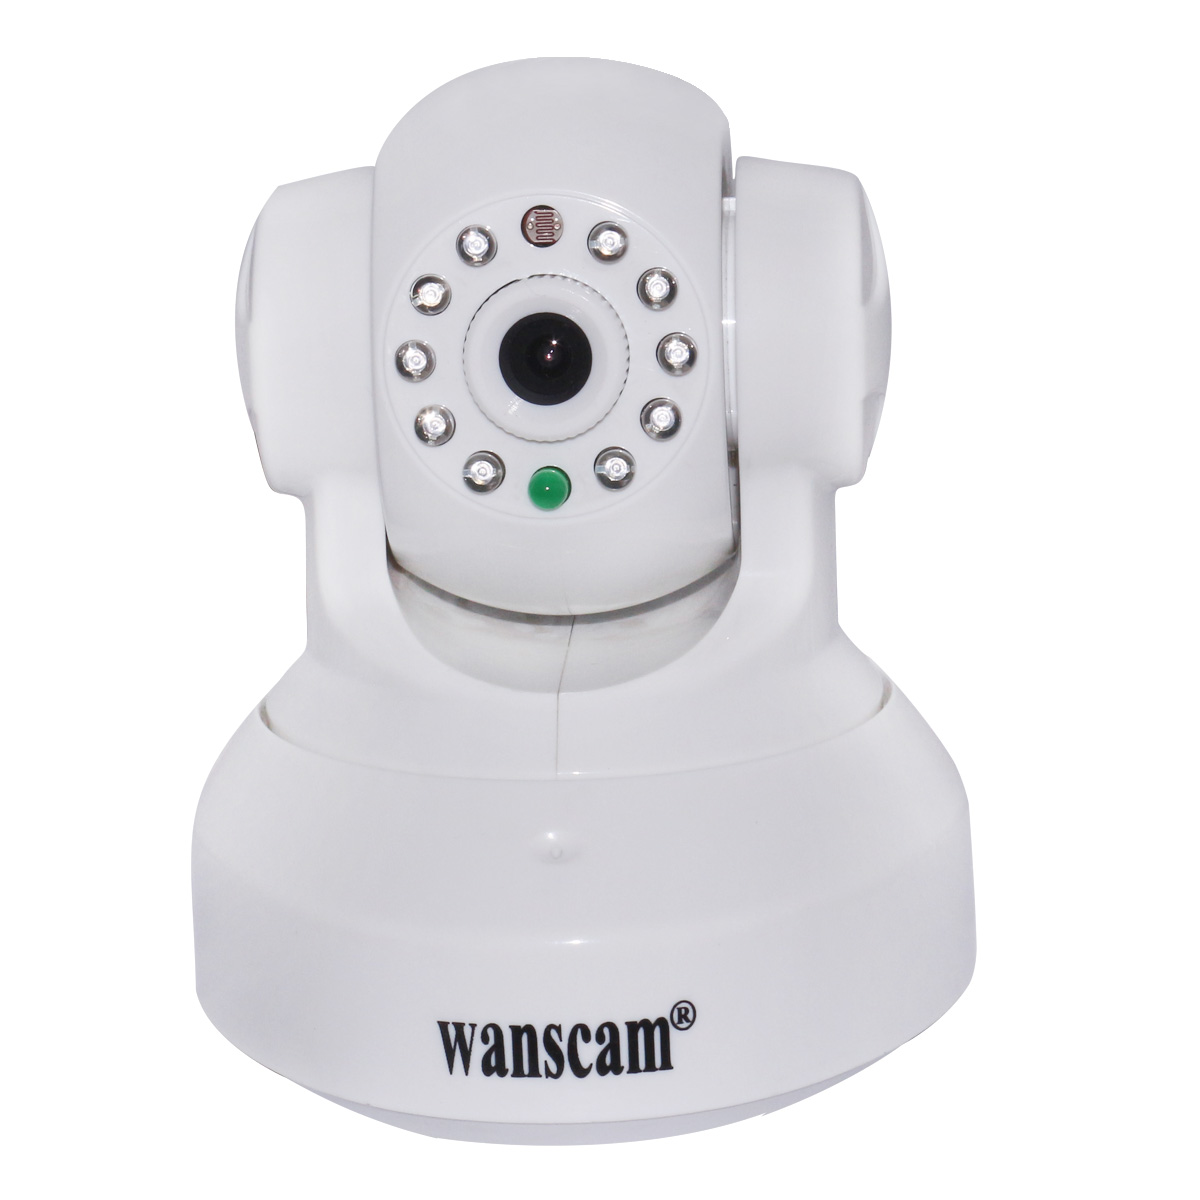 Wanscam JW0012 White Color Mini CCTV Camera WiFi WPA Network Webcam Wireless camara IP Internet For Home security Surveillance Free Iphone Android App